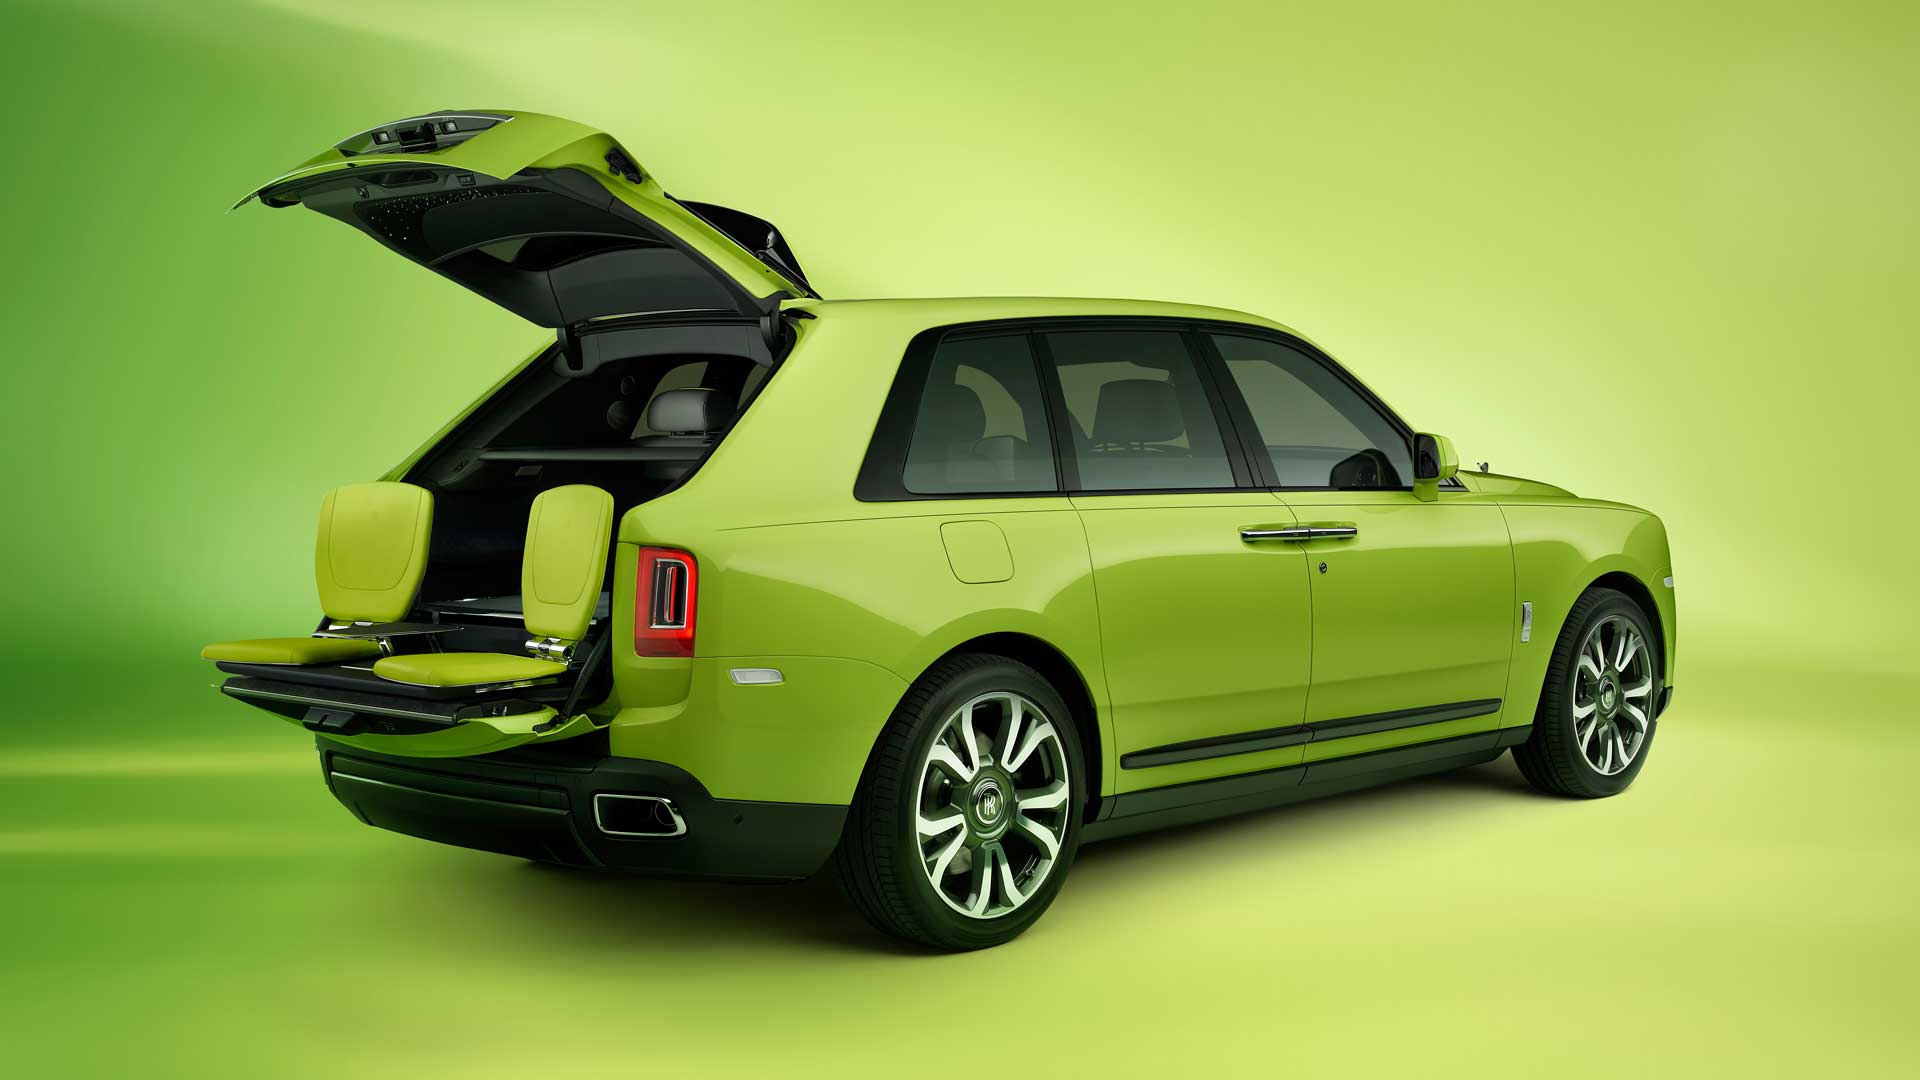 cullinan-inspired-by-fashion-verde-lime-rolls-royce-robb-report-italia